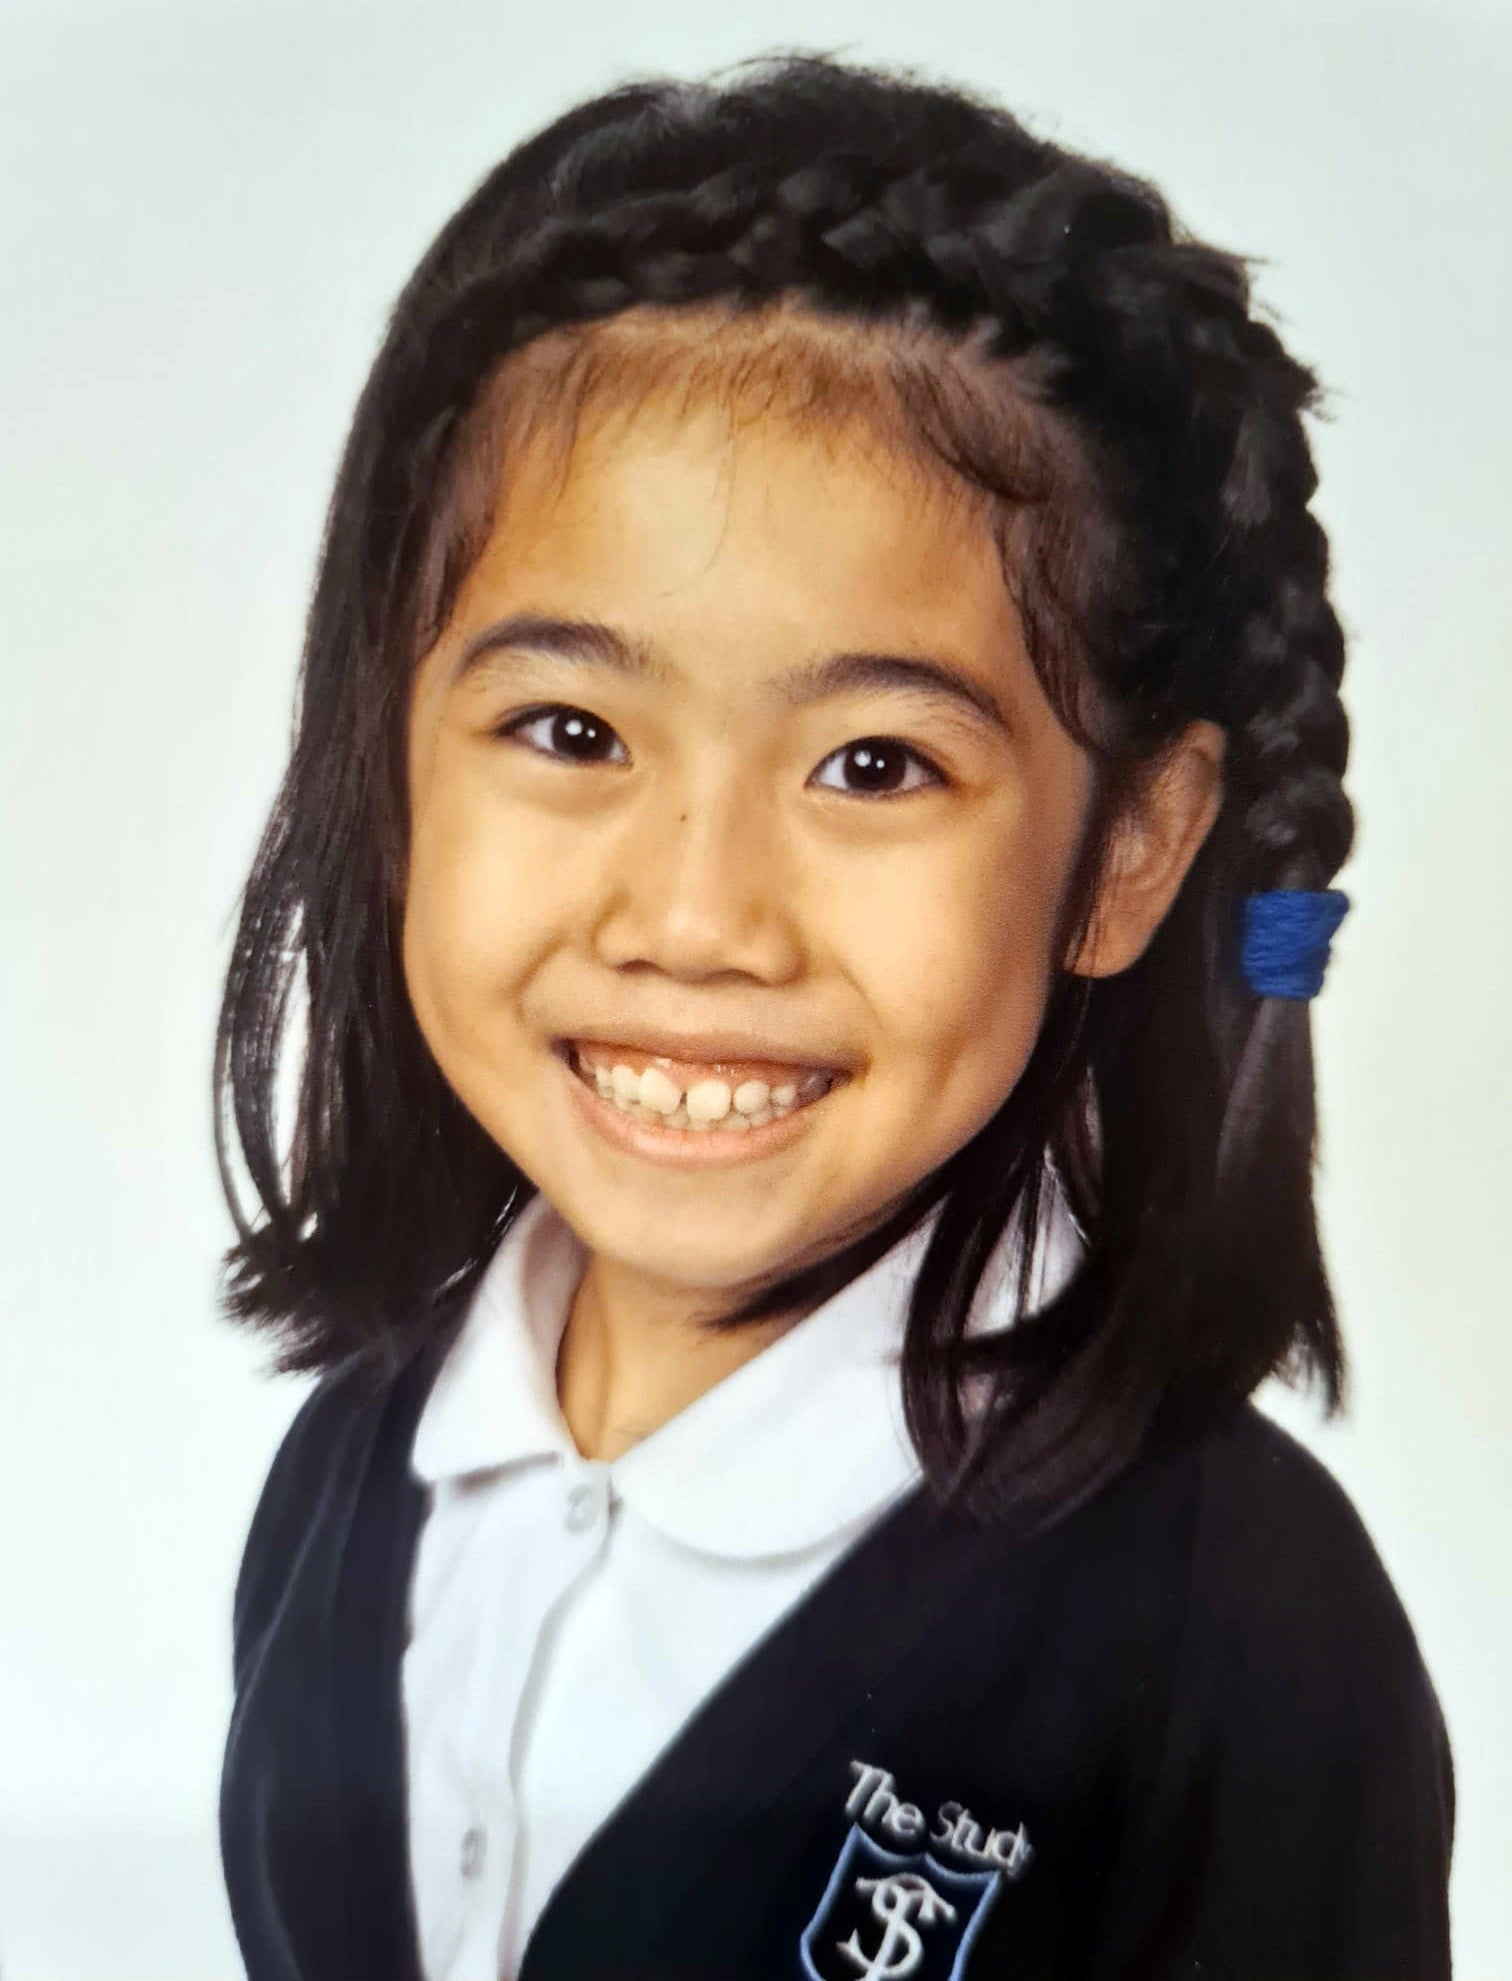 Eight-year-old Selena Lau was also killed in the incident